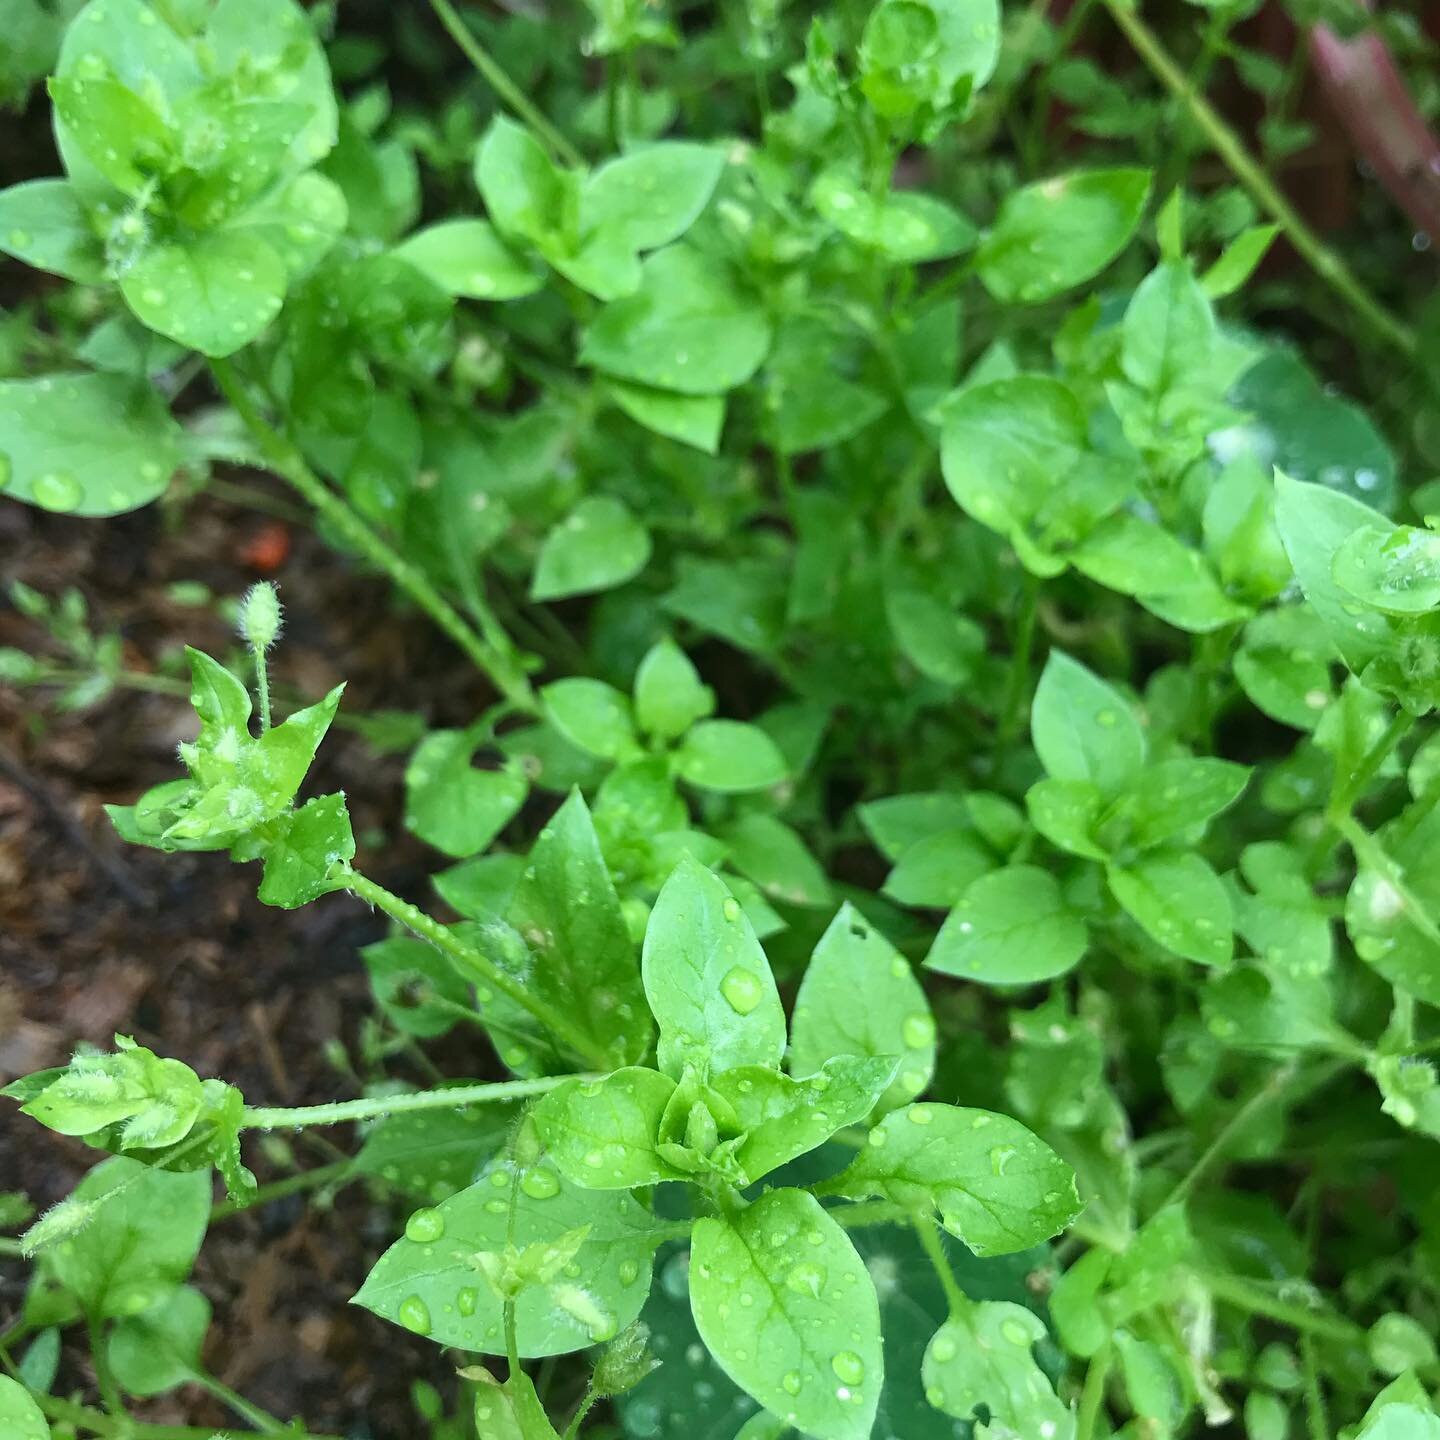 Chickweed grows in disturbed places - I always find them in gardens, in the more feral corners. 

This ally is really rich in minerals and is considered cooling and moistening. I use chickweed when my body is asking for more nutrients, or when I or s